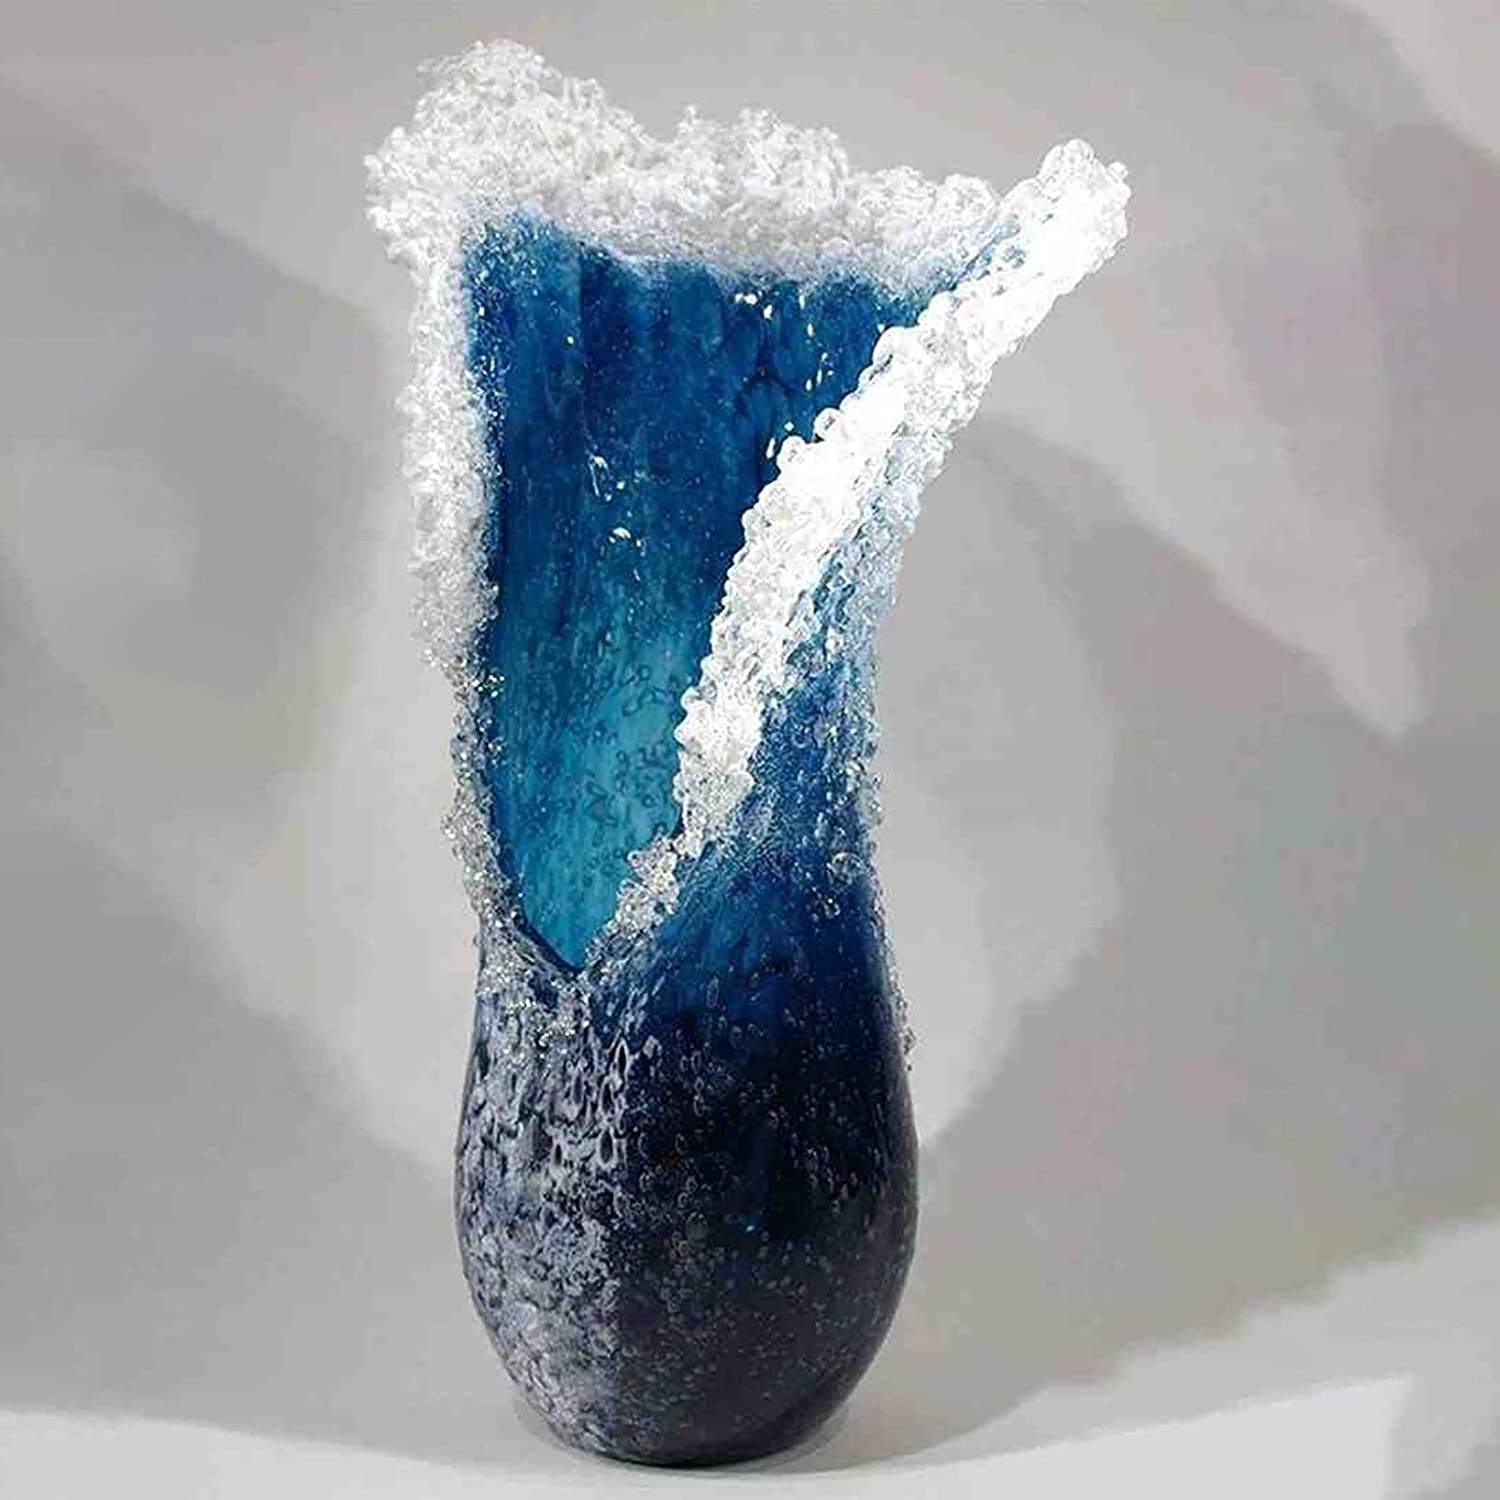 These Incredible Glass Vases Are Made To Look Like an Ocean Wave